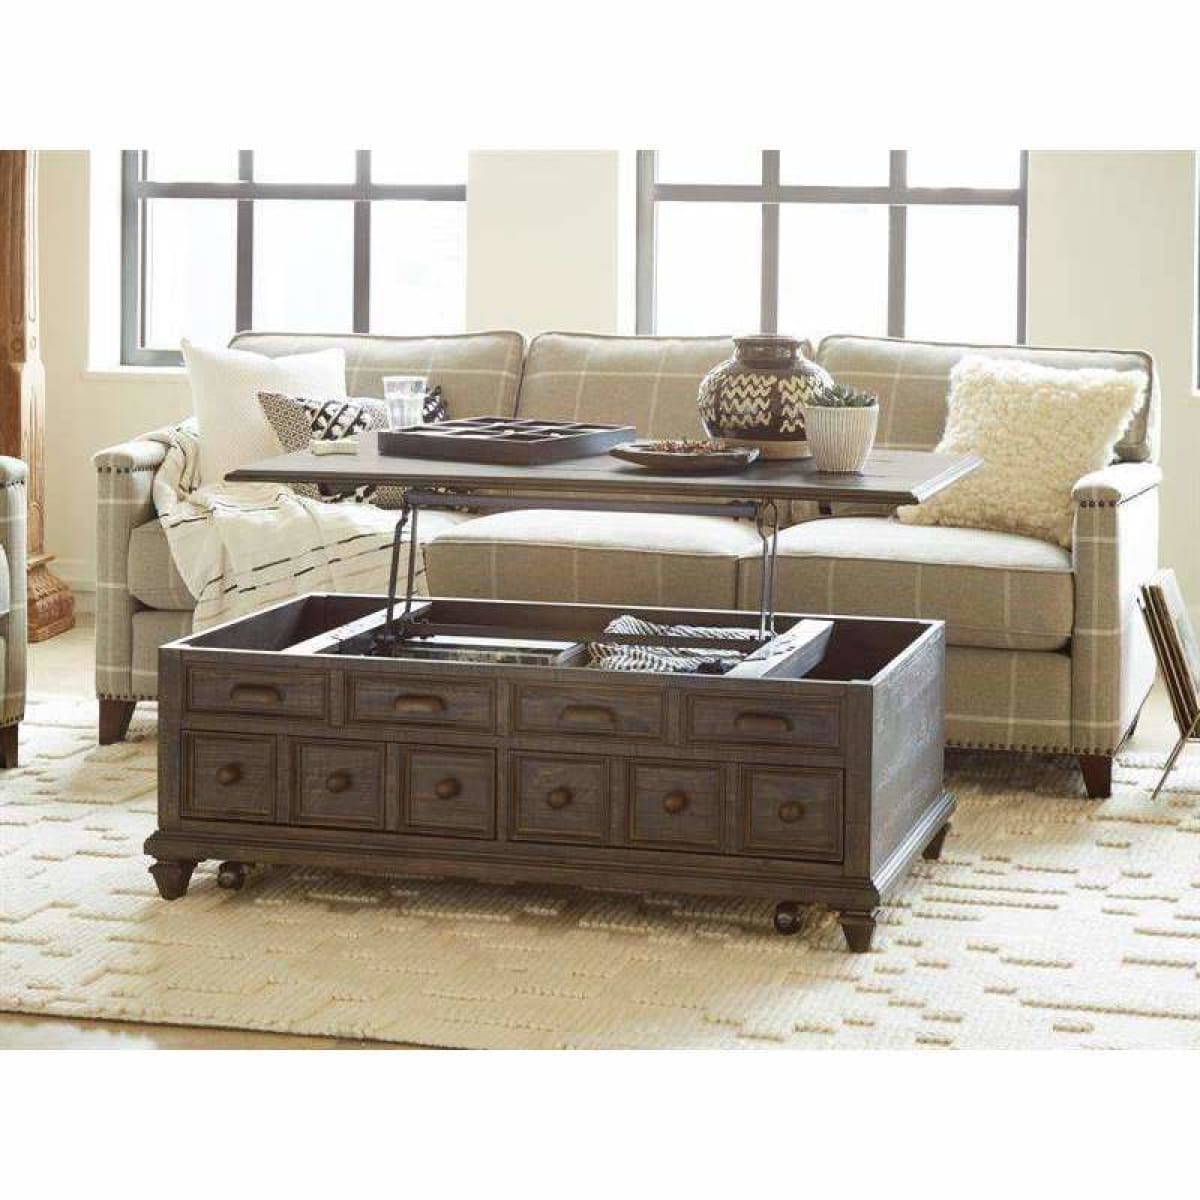 Burkhardt Lift Top Storage Cocktail Table w/Casters - COFFEE TABLE